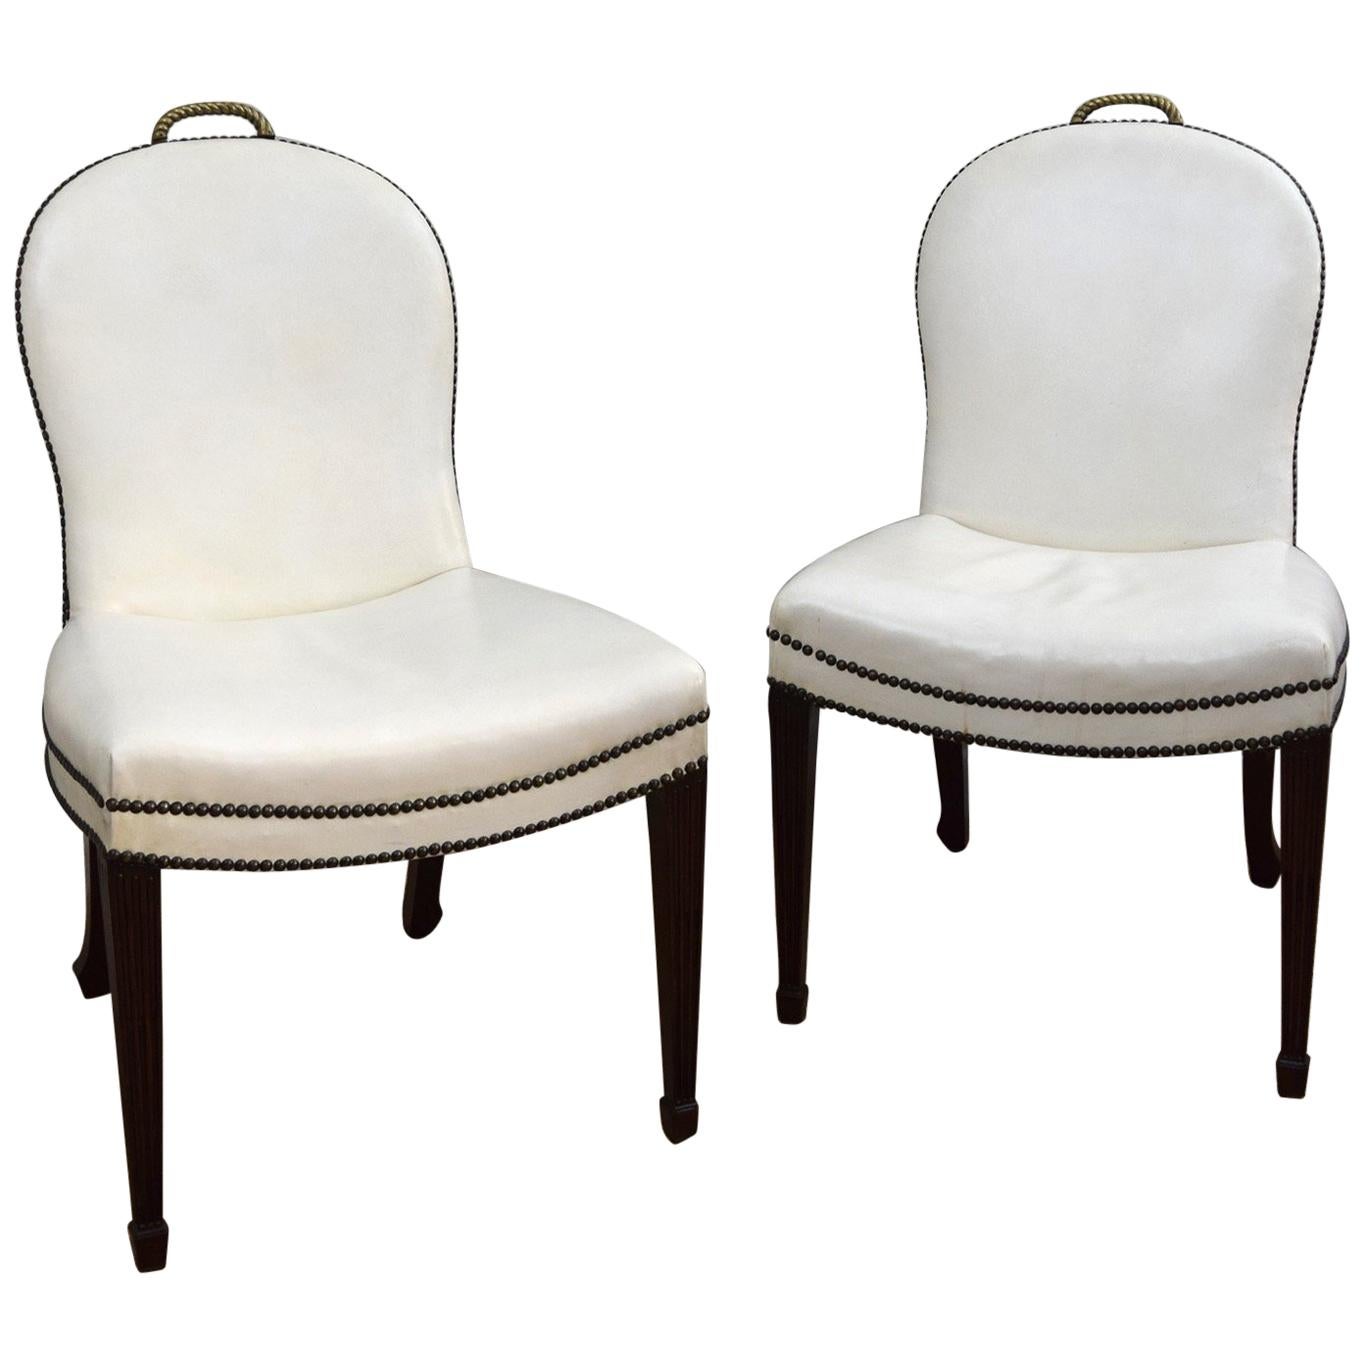 Pair of  American 1930s 'Cafe Society' Chairs